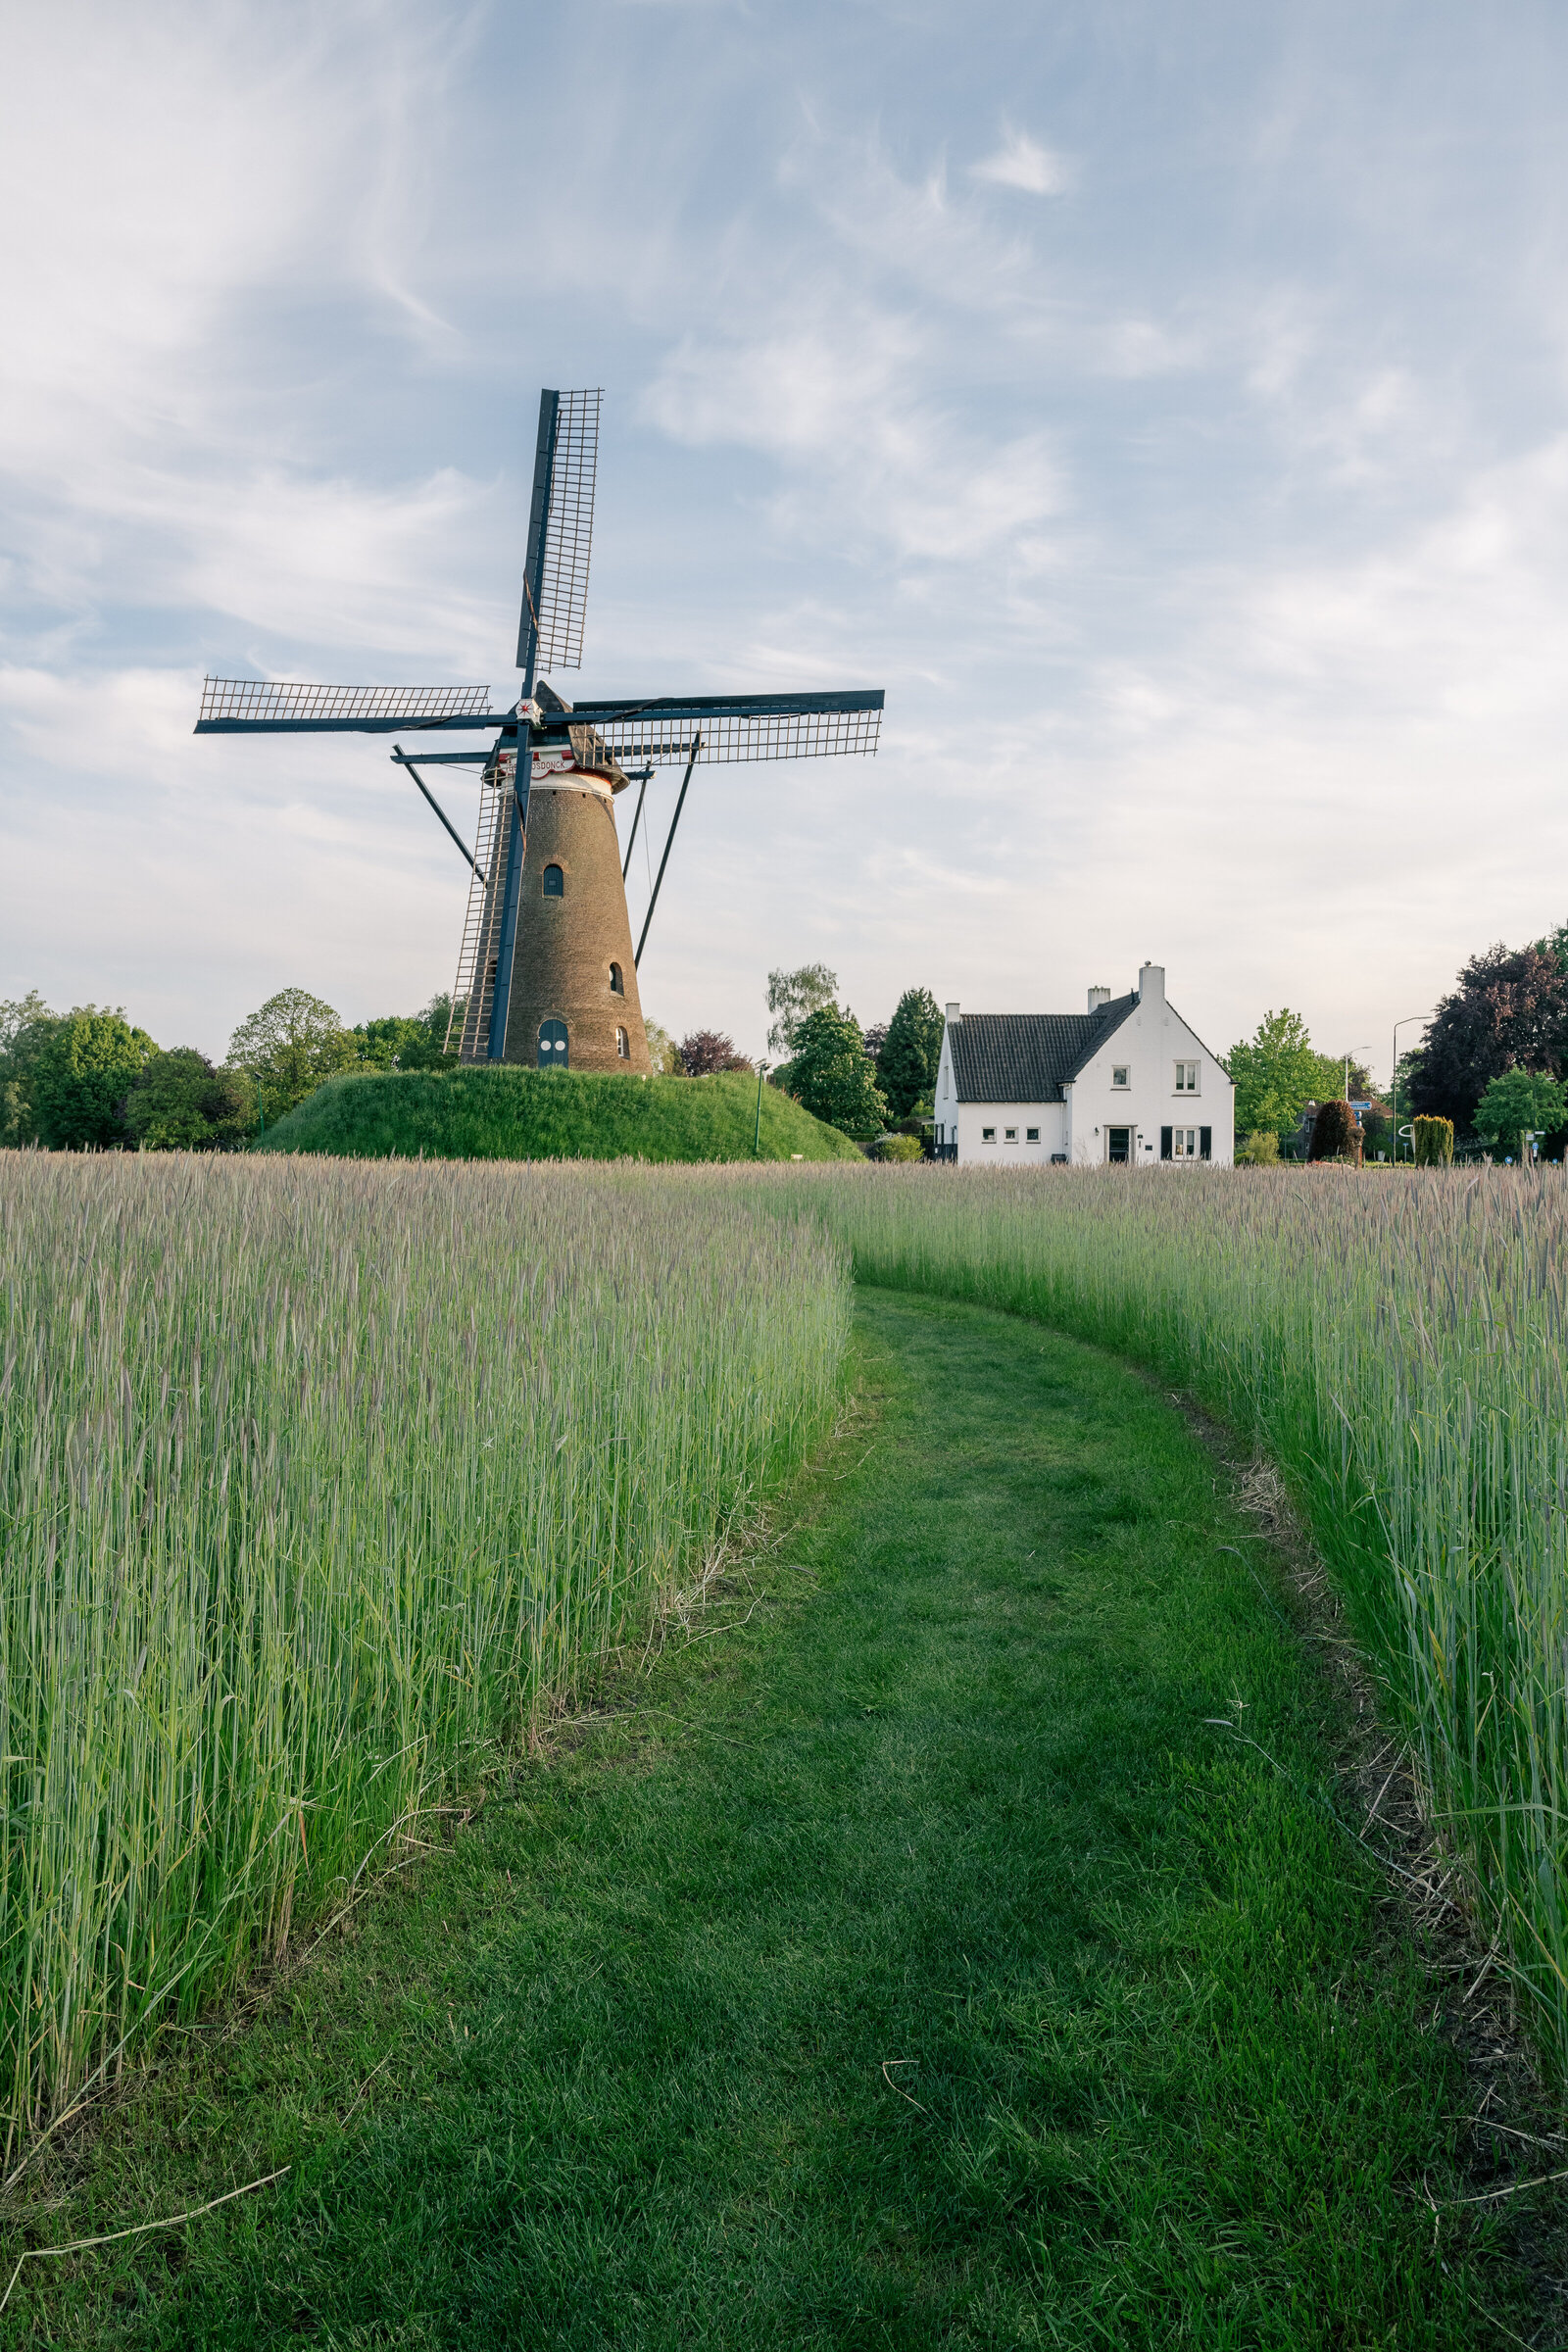 The rye is growing and green around the famous Roosdonck windmill by Nuenen